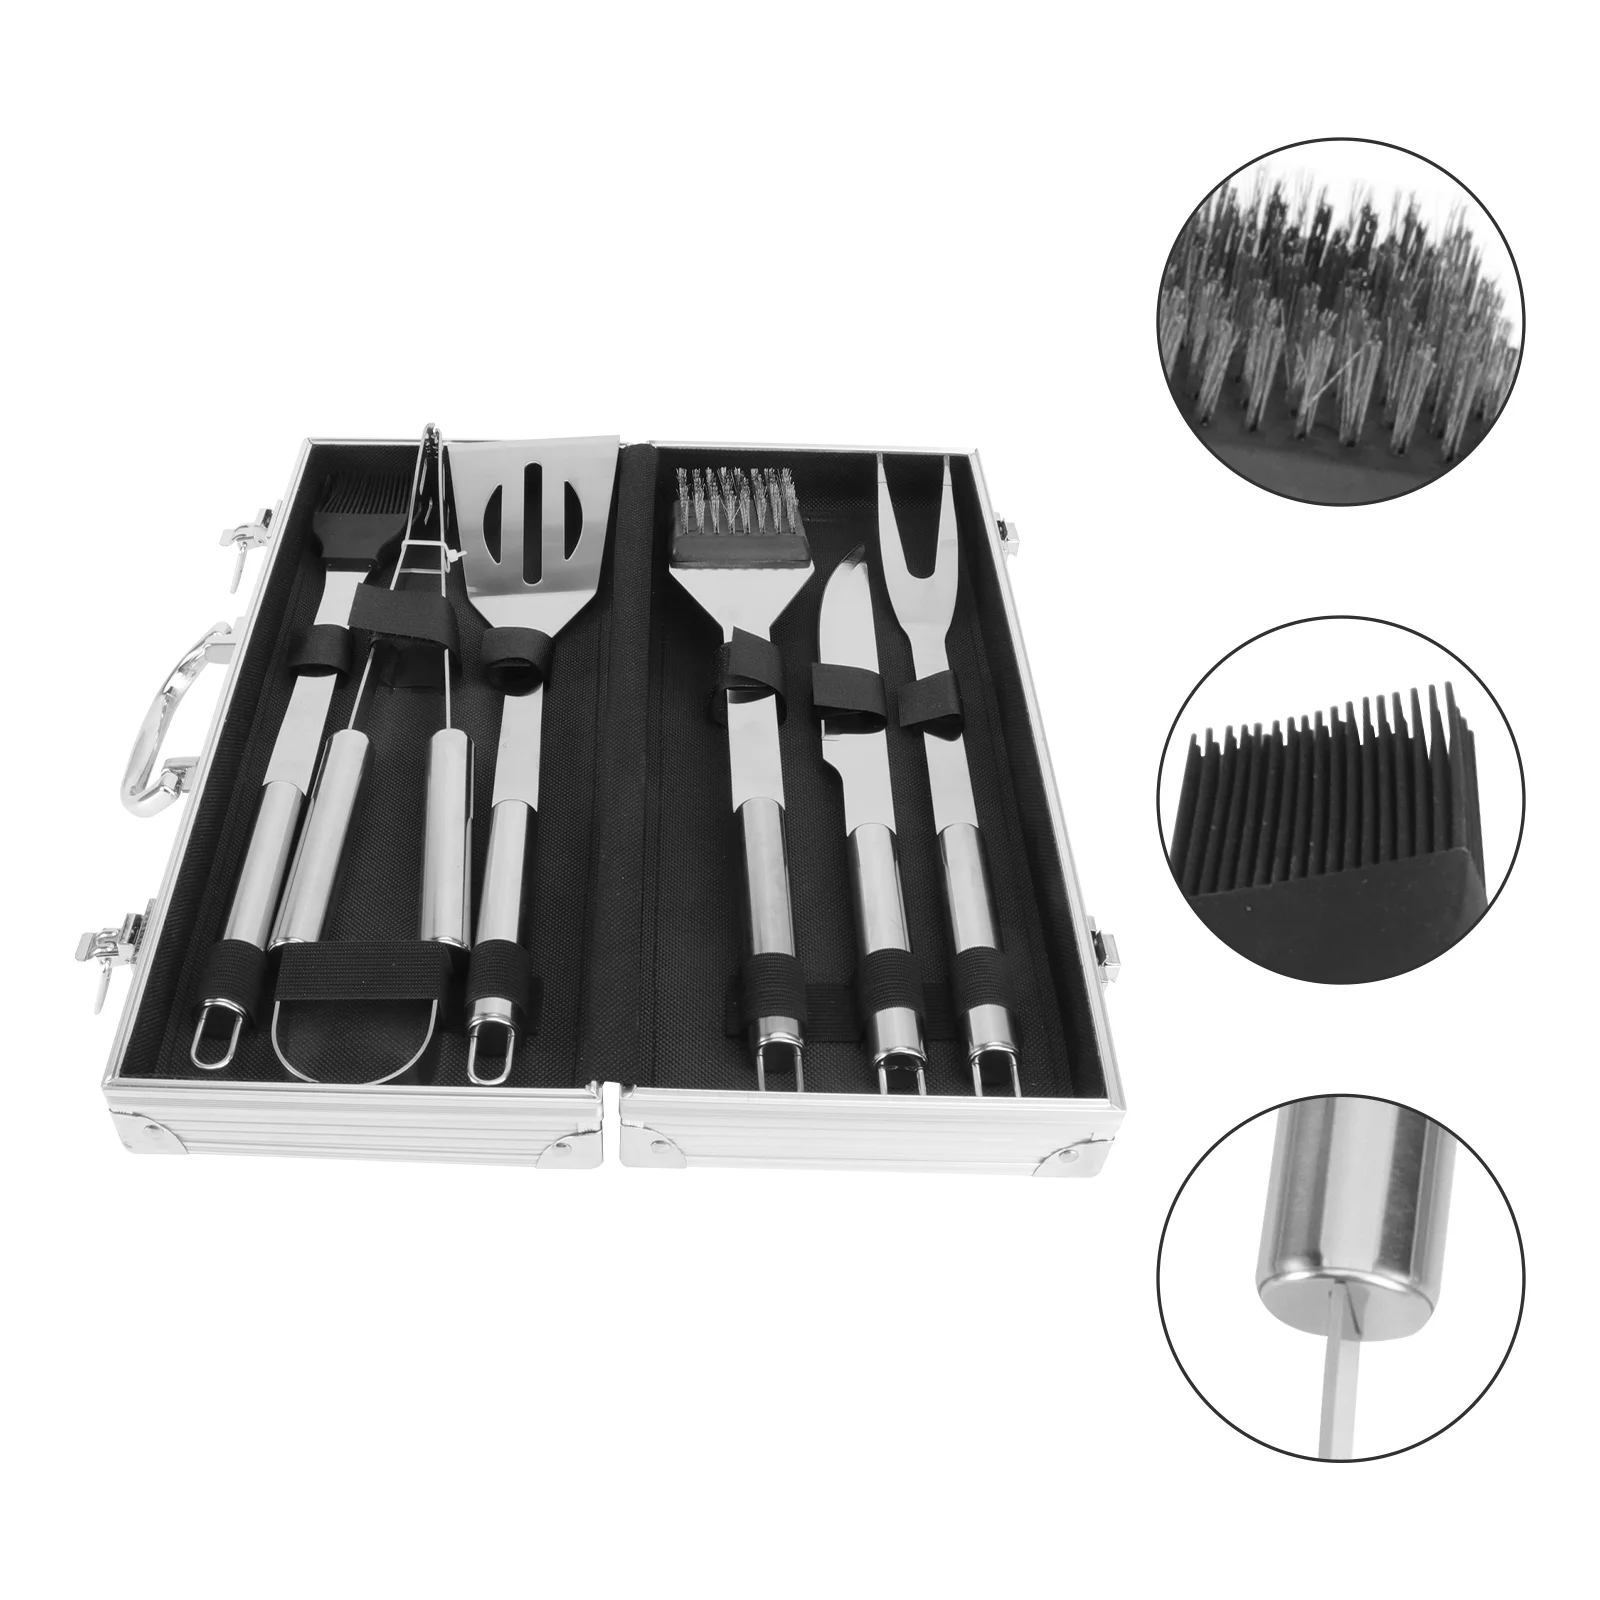 

Outdoor Portable Barbecue 6-piece Set Grill Cookware Utensils with Aluminium Case BBQ Tools Combination